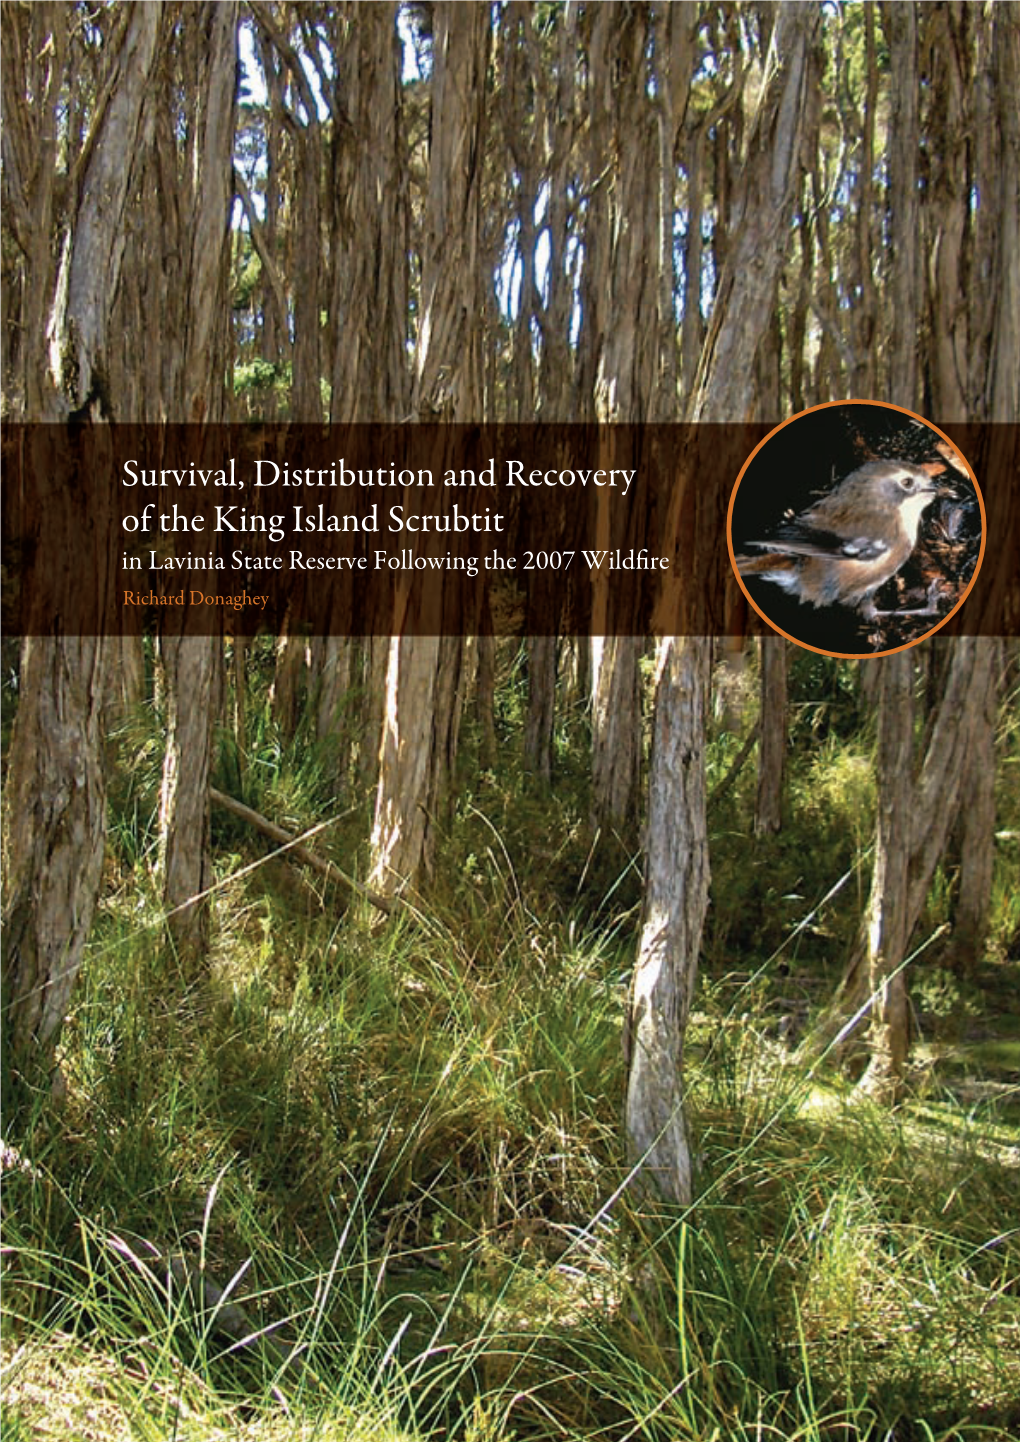 Survival, Distribution and Recovery of the King Island Scrubtit in Lavinia State Reserve Following the 2007 Wildfire